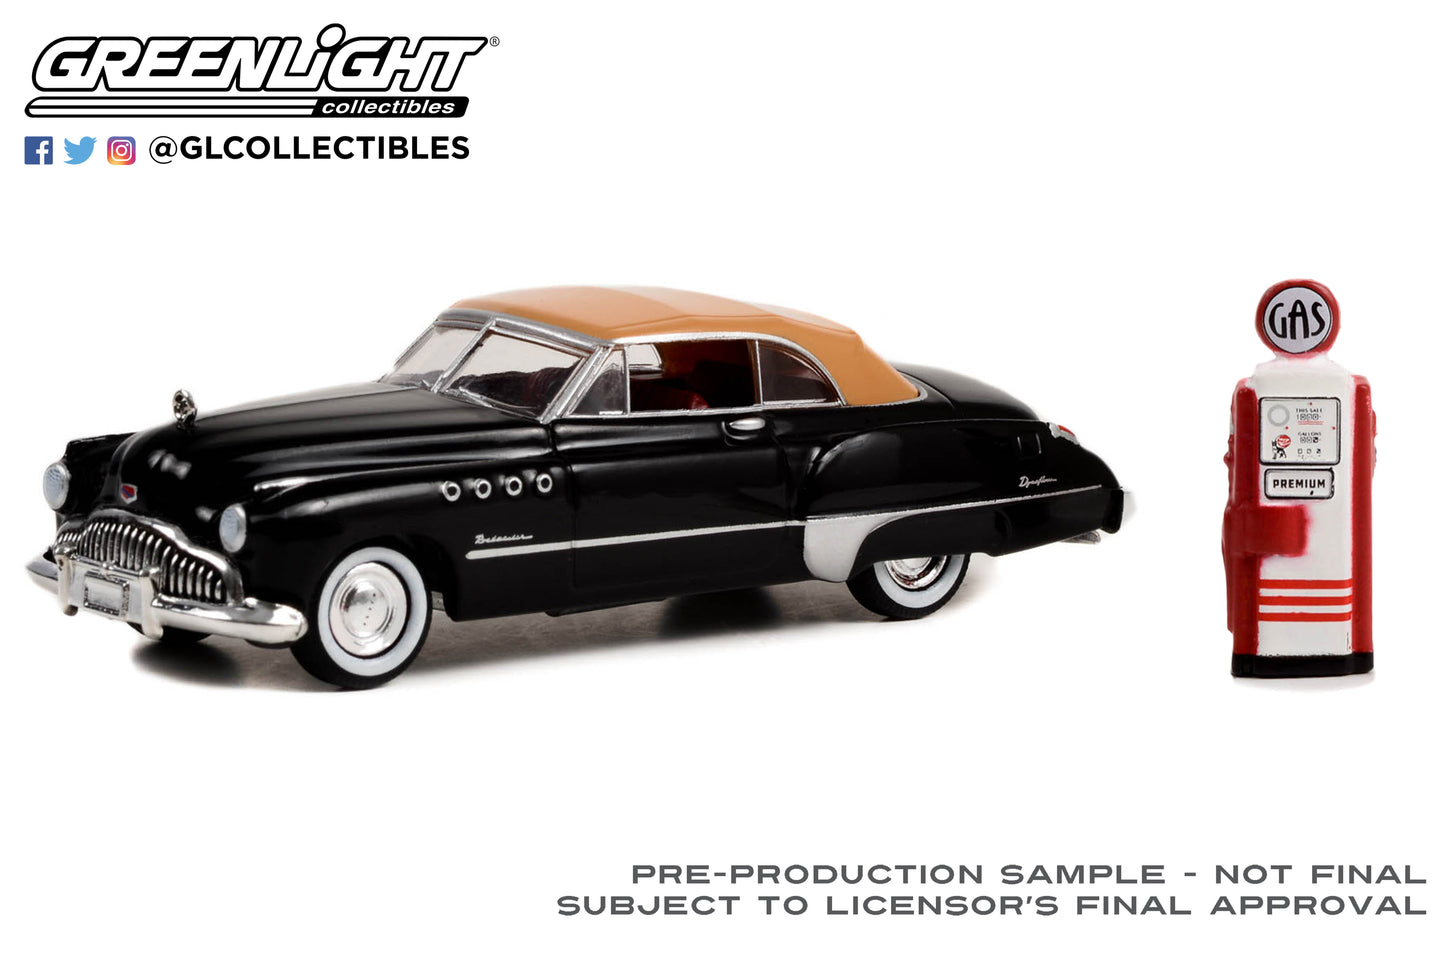 GreenLight 1:64 The Hobby Shop Series 14 - 1949 Buick Roadmaster Convertible (Top Up) with Vintage Gas Pump 97140-A